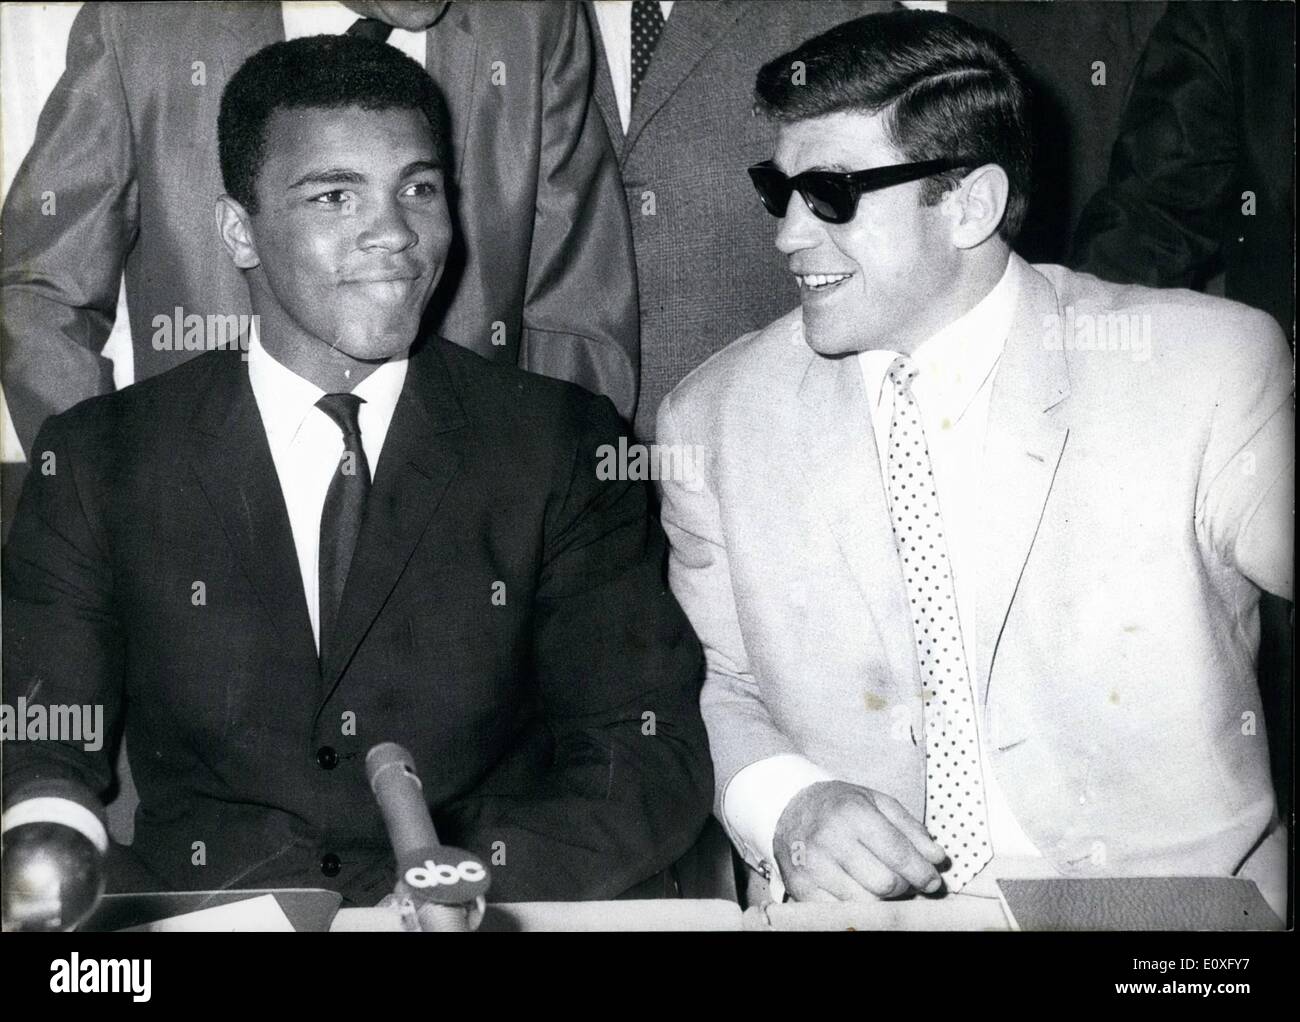 Sep. 09, 1966 - On 7-9-1966 there was a press conference in Frankfurt with Joe Louis, Cassius Clay and Karl Mildenberger. OPS: Cassius Clay and Karl Mildenberger. Keystone-Bild 8-9-1966 Stock Photo